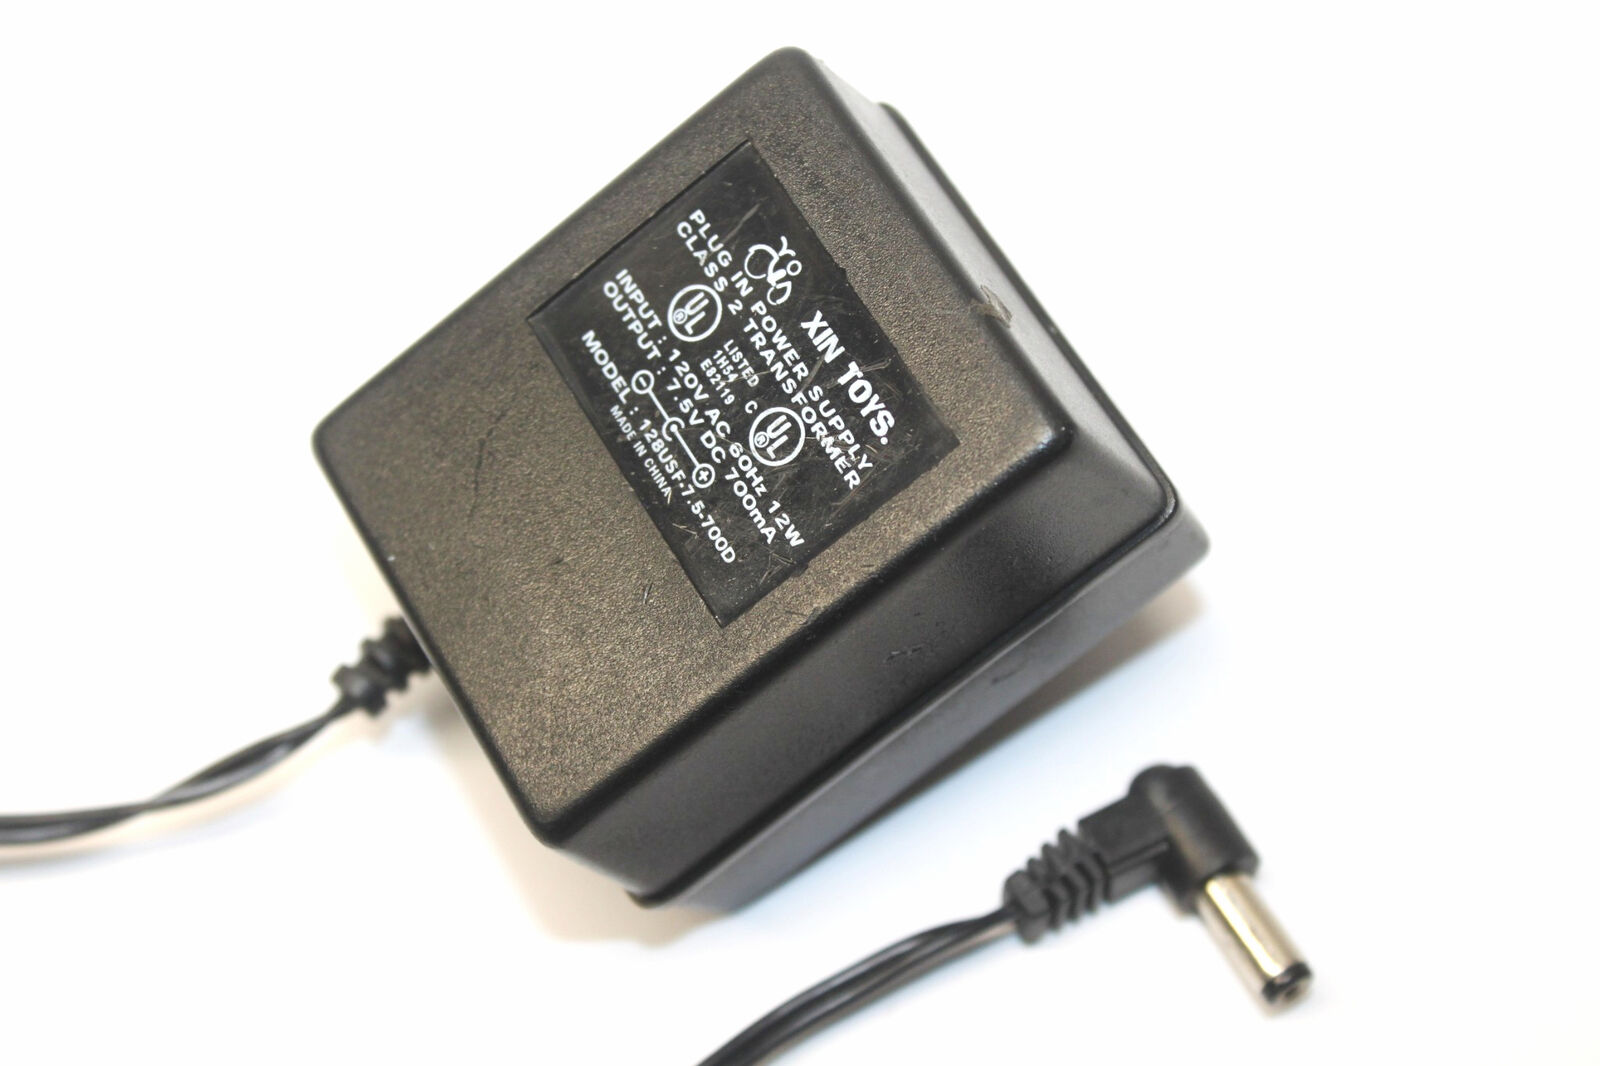 Xin Toys 128USF-7.5-700D Plug-In Class 2 Transformer AC Adapter DC 7.5V 700mA - Click Image to Close